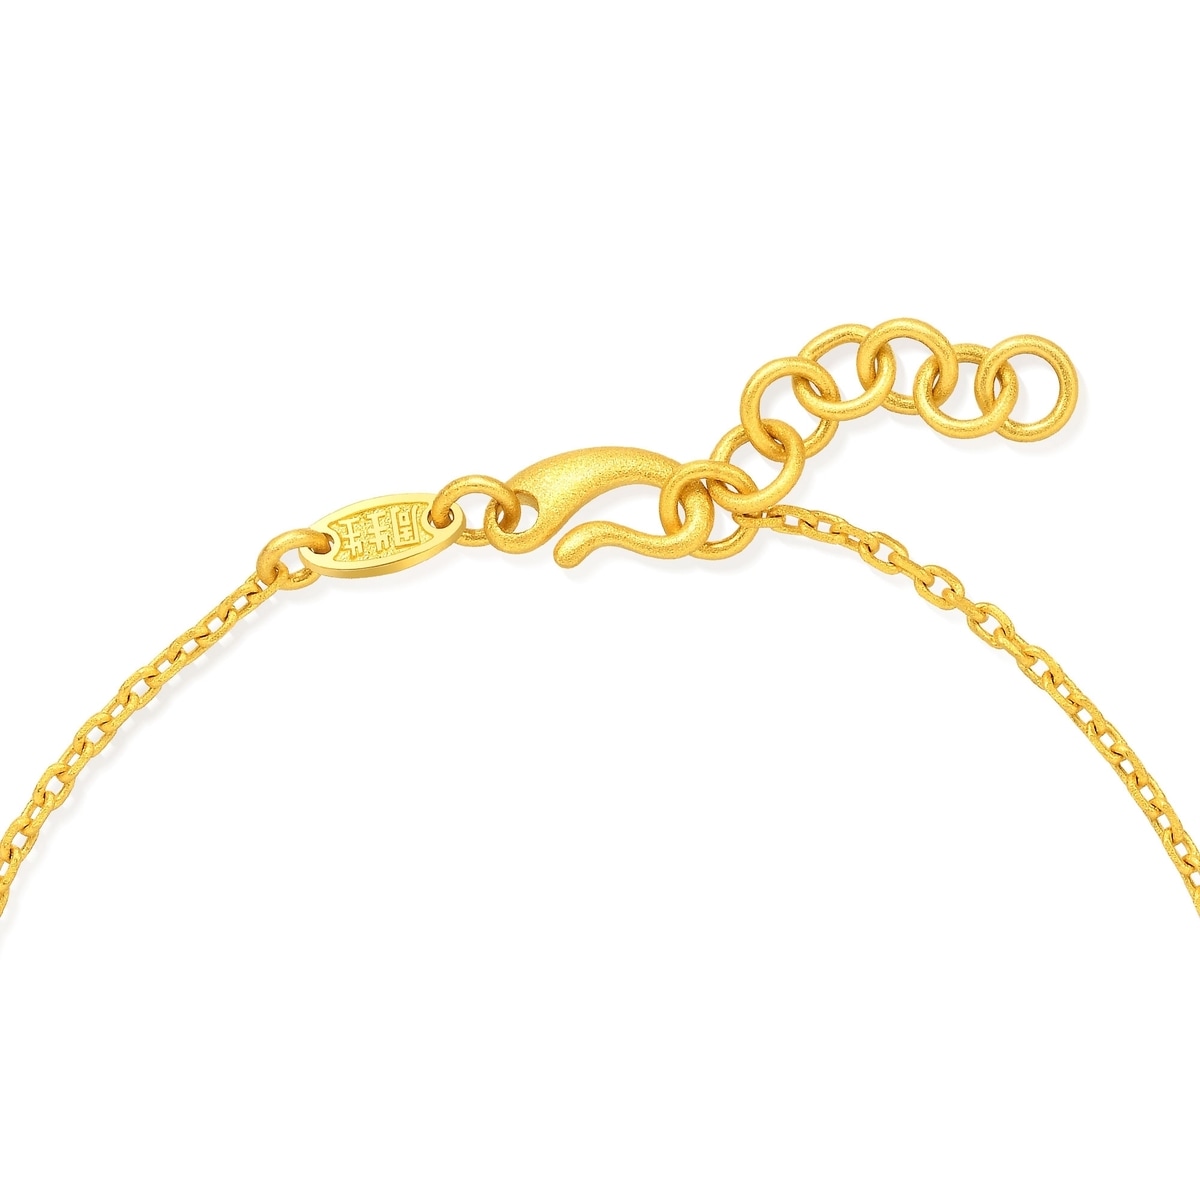 Cultural Blessings 999.9 Gold Bracelet - 92490B | Chow Sang Sang Jewellery